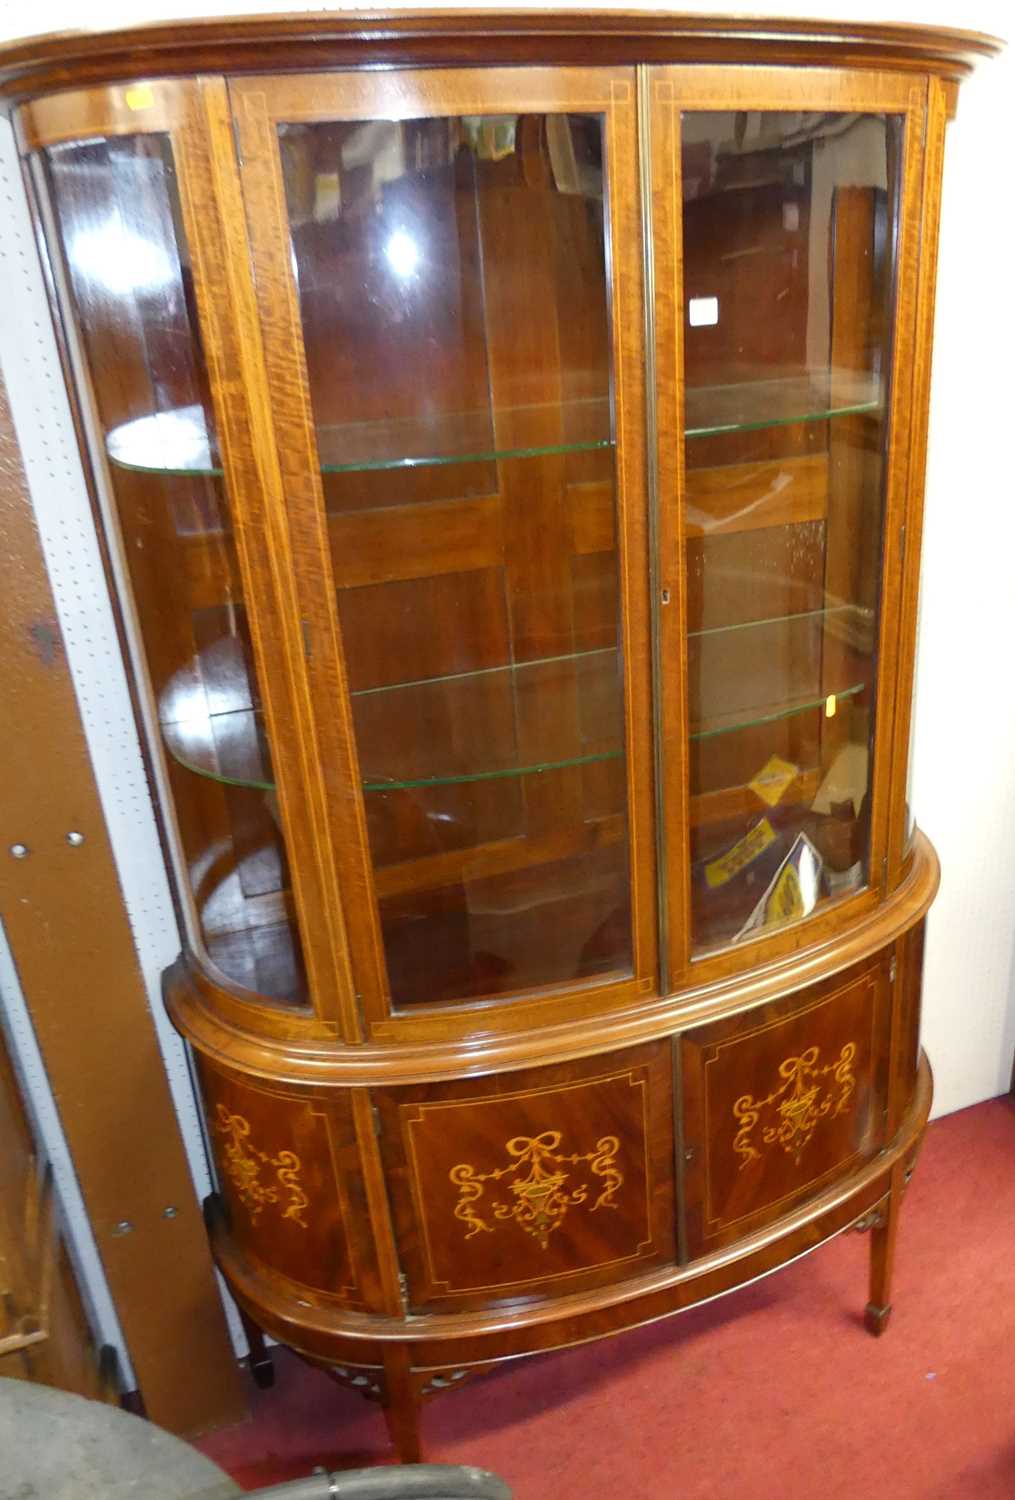 An Edwardian mahogany and floral satin wood inlaid demi-lune double door glazed china display